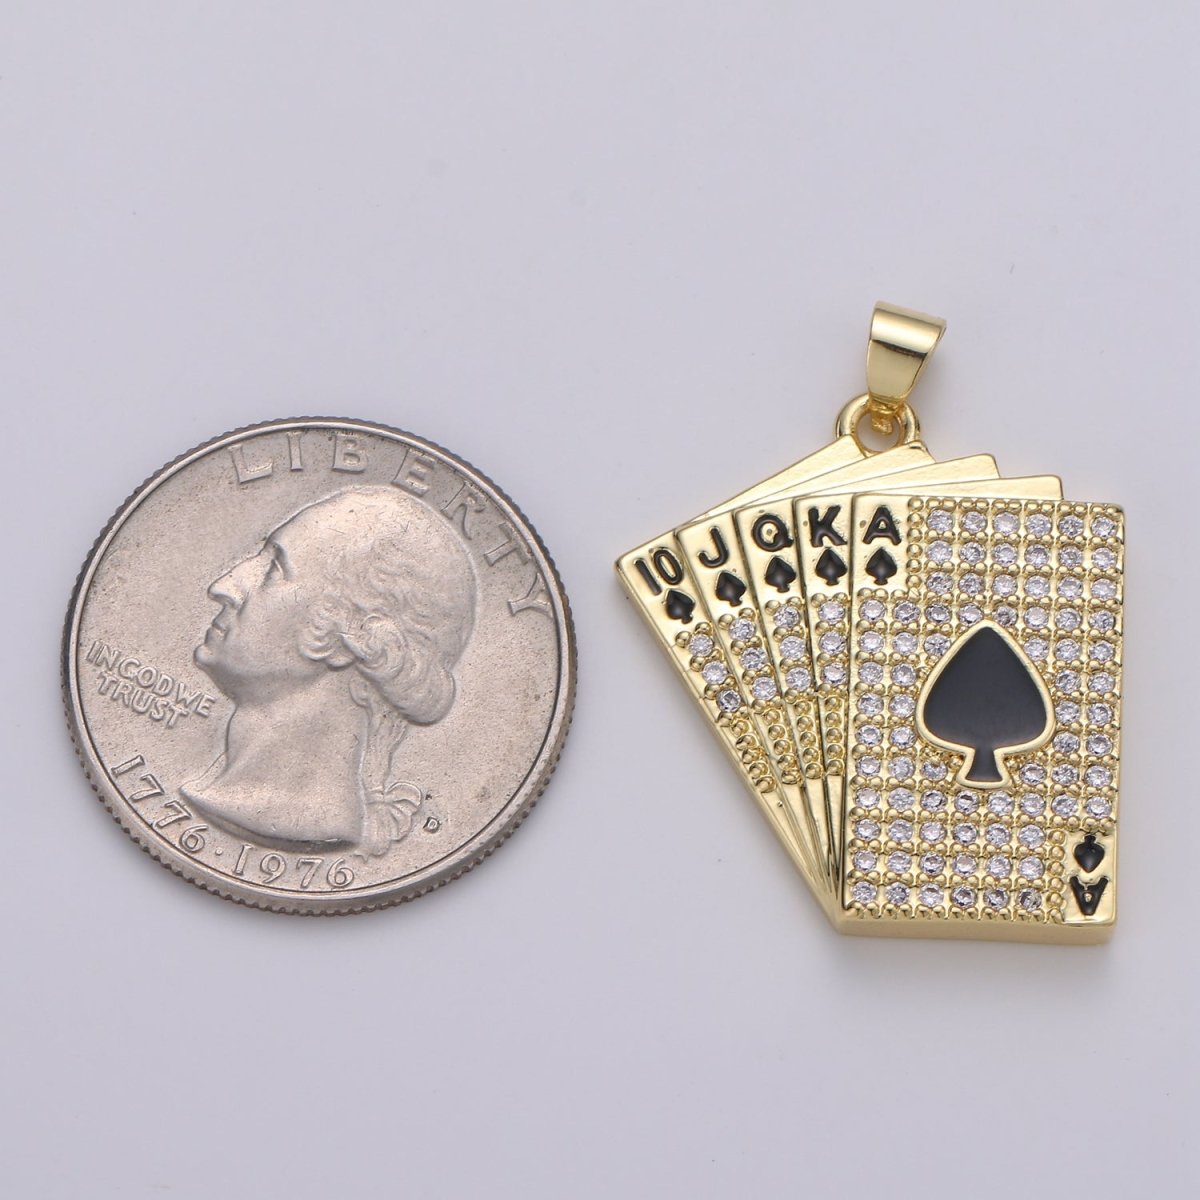 Straight Flush Poker Cards Pendant Micro Pave Poker card game Necklace Charm in 14k Gold filled Charm J-214 - DLUXCA